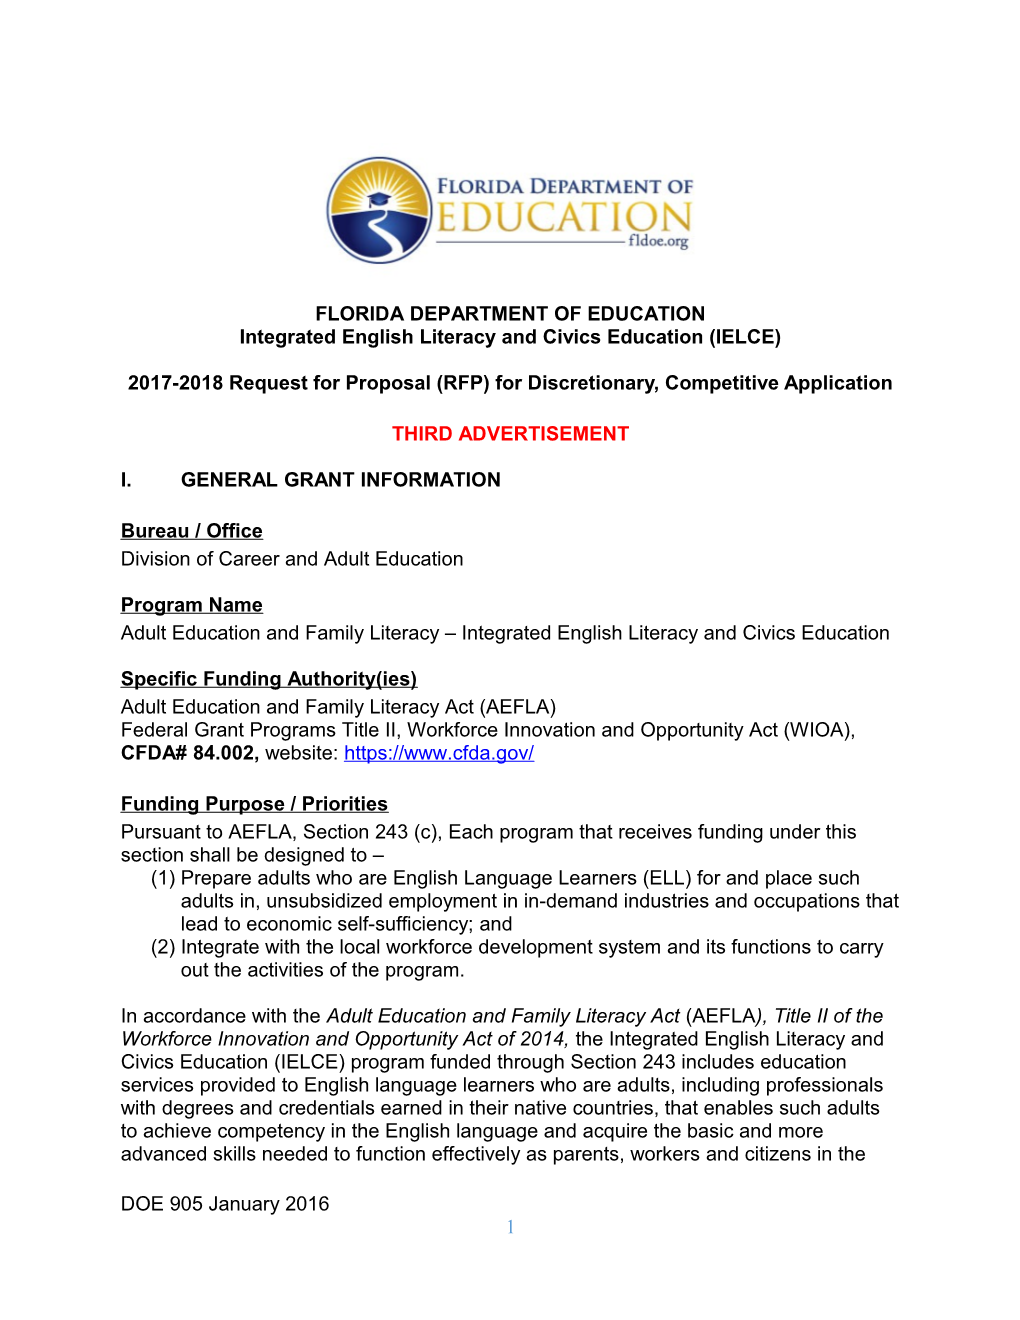 Integrated English Literacy and Civics Education (IELCE)